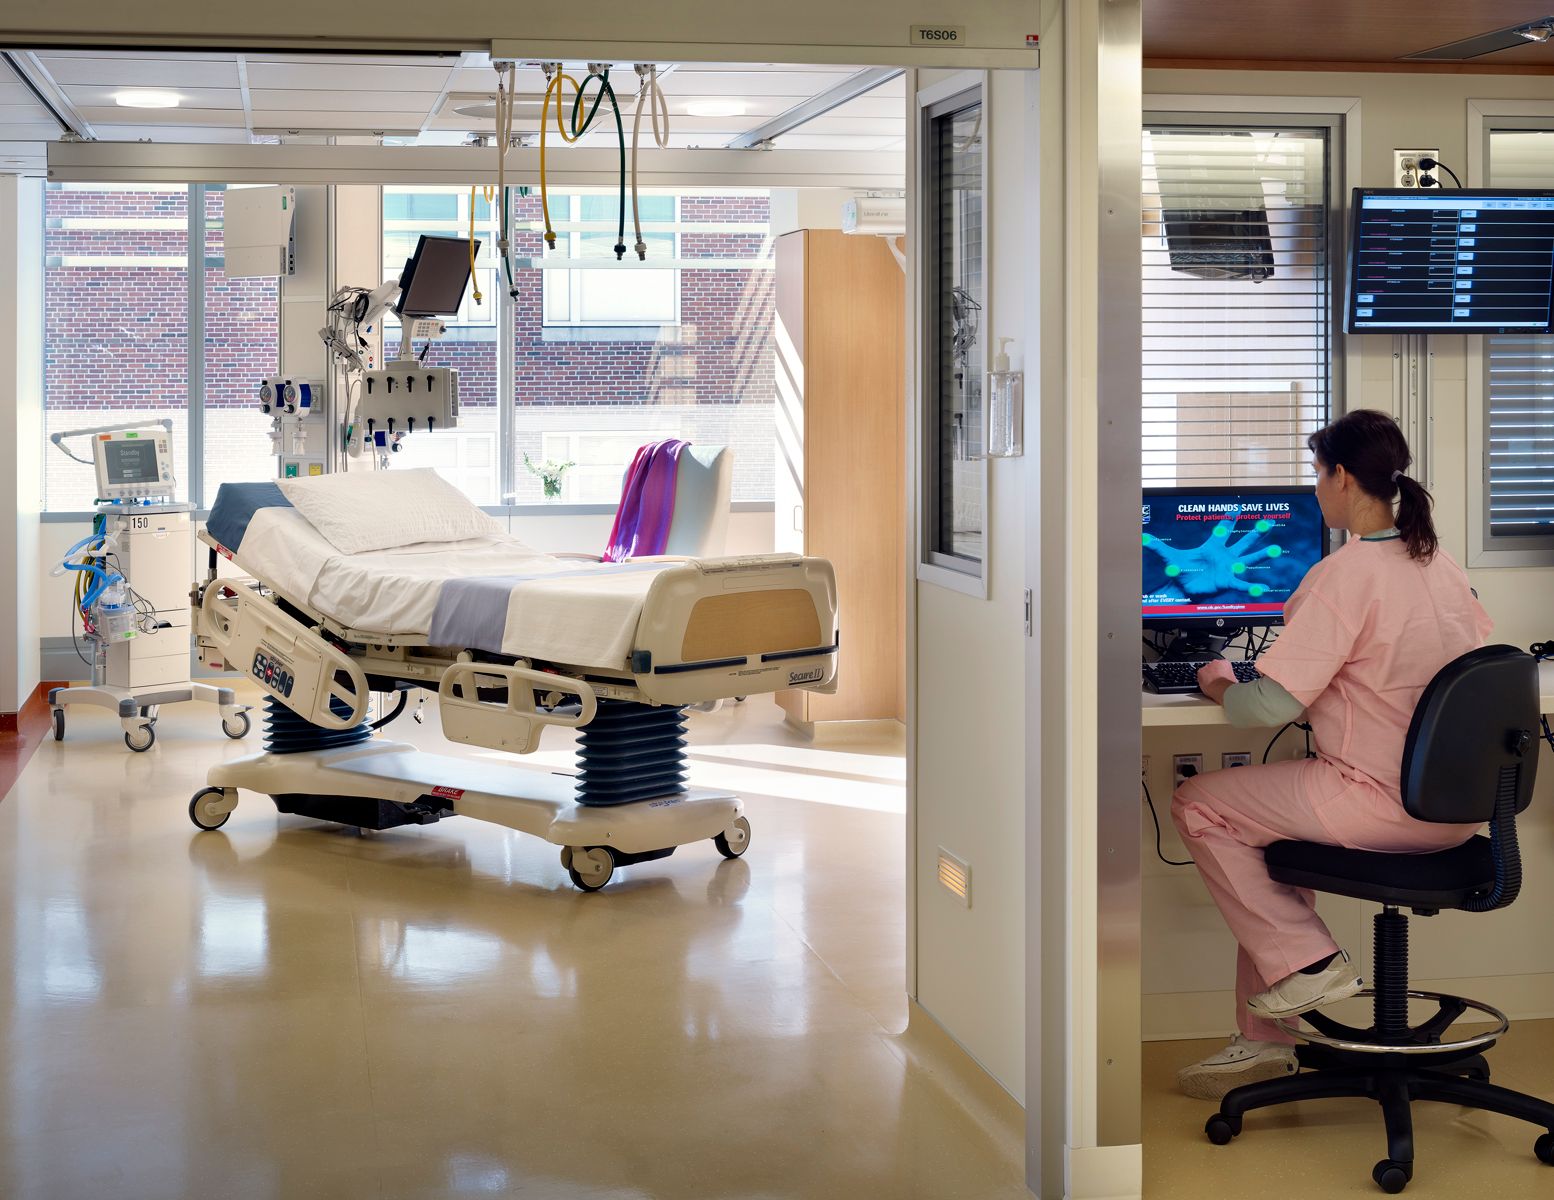 External nurses' station looking into a patient room with large window and medical equipment